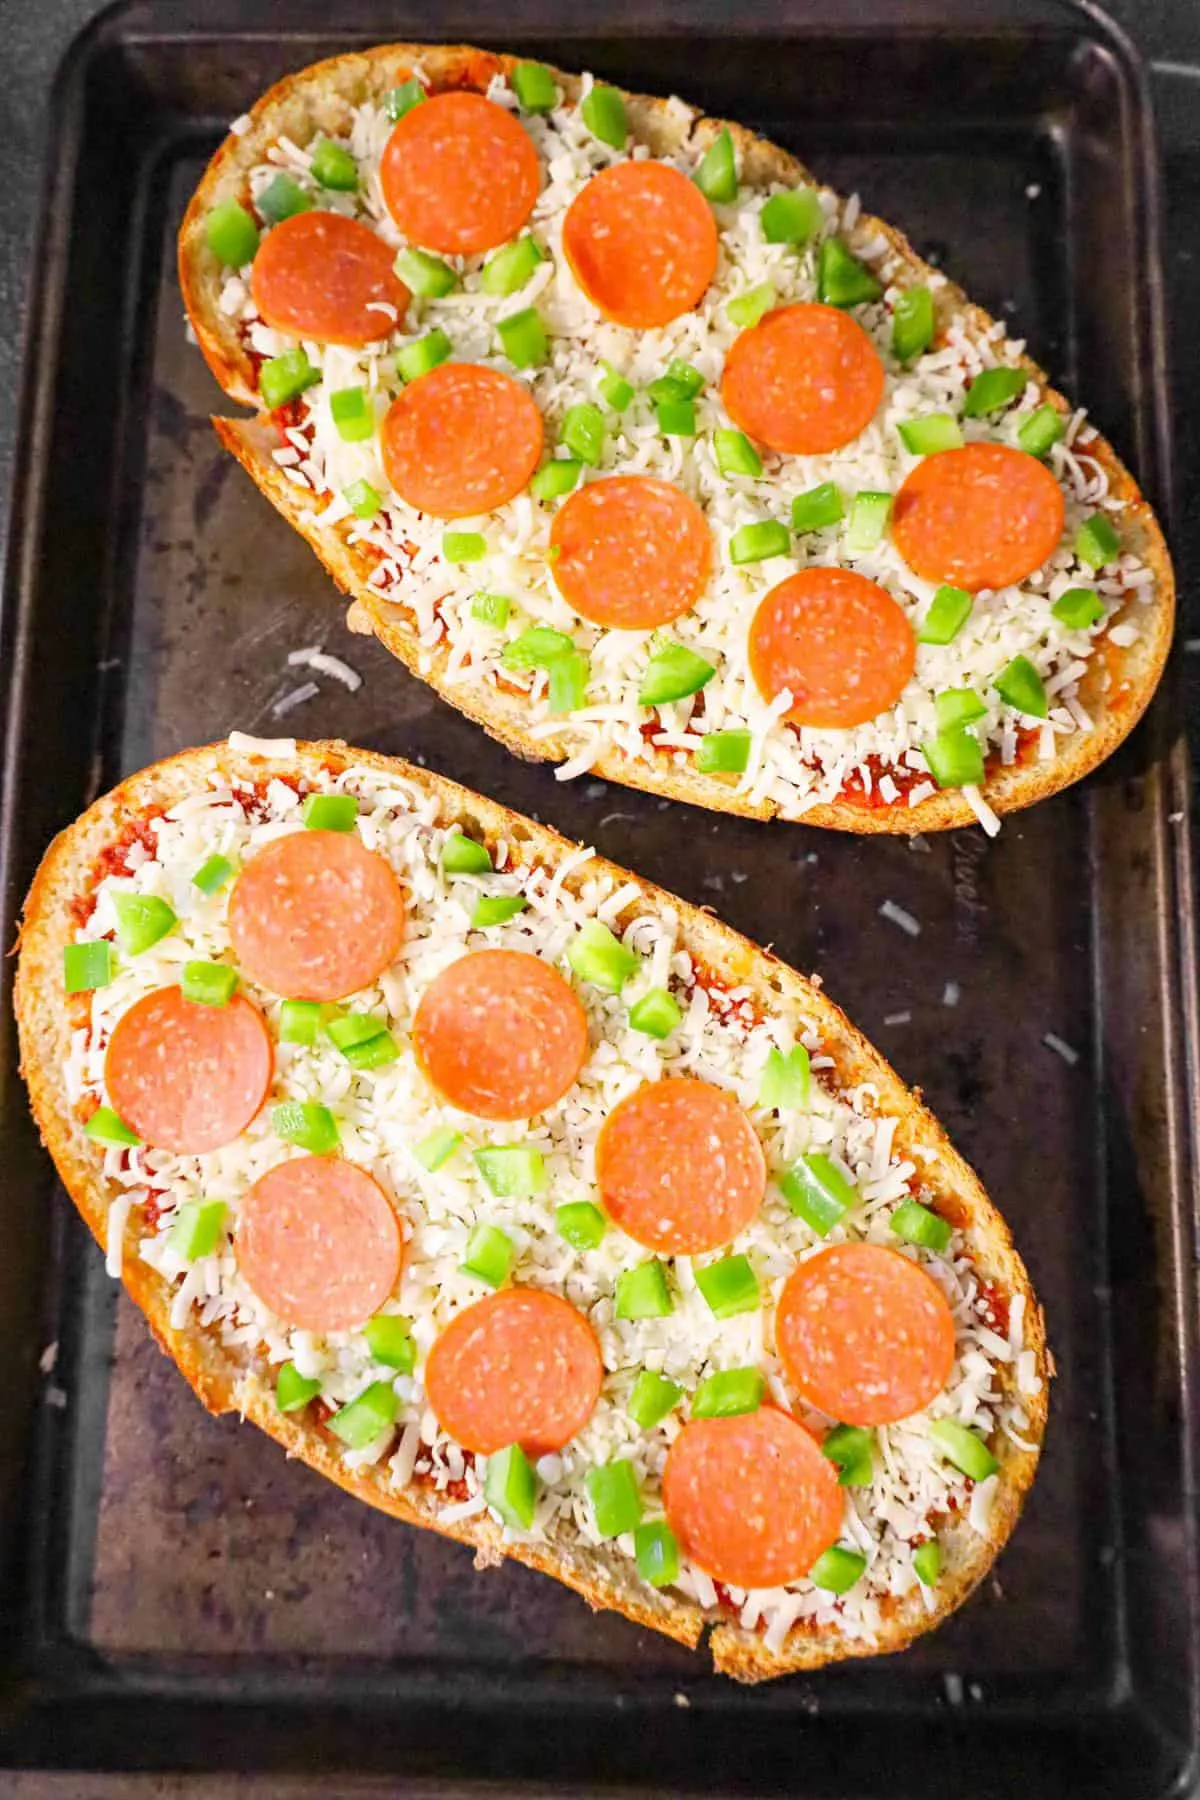 pepperoni, diced green peppers and shredded mozzarella cheese on top of french bread